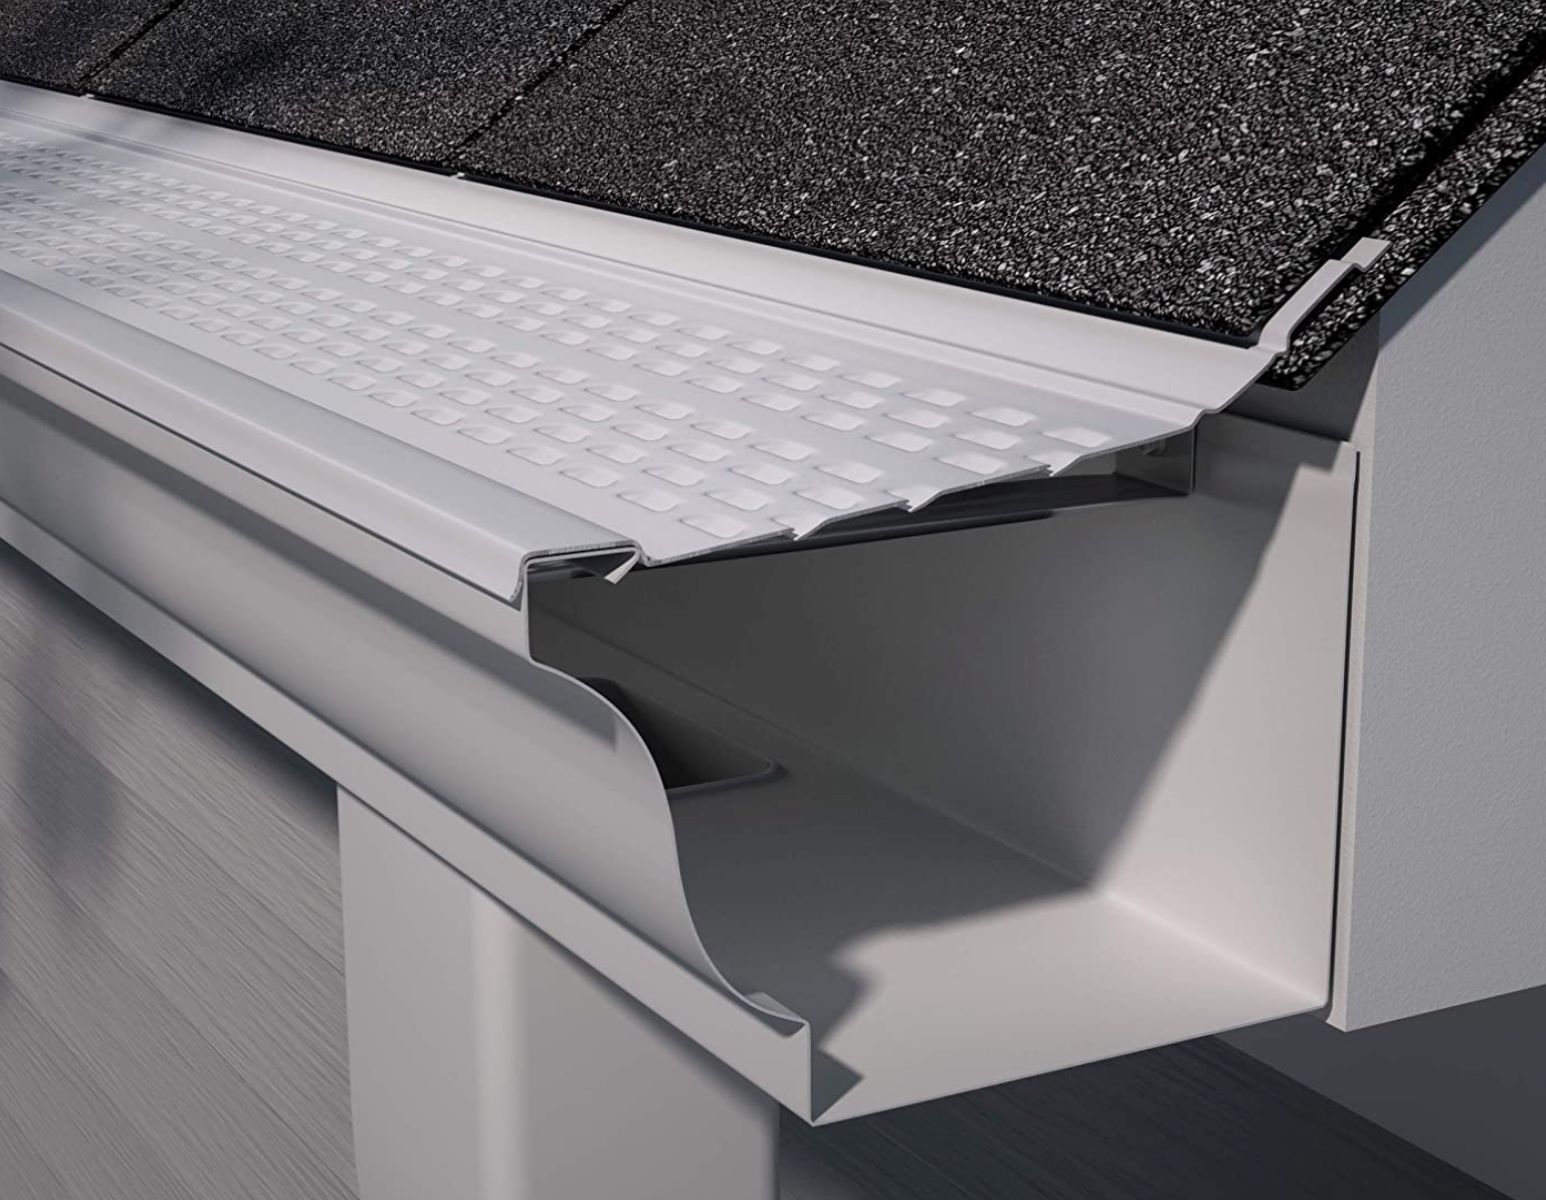 9 Amazing Leaf Guards For Gutters For 2023